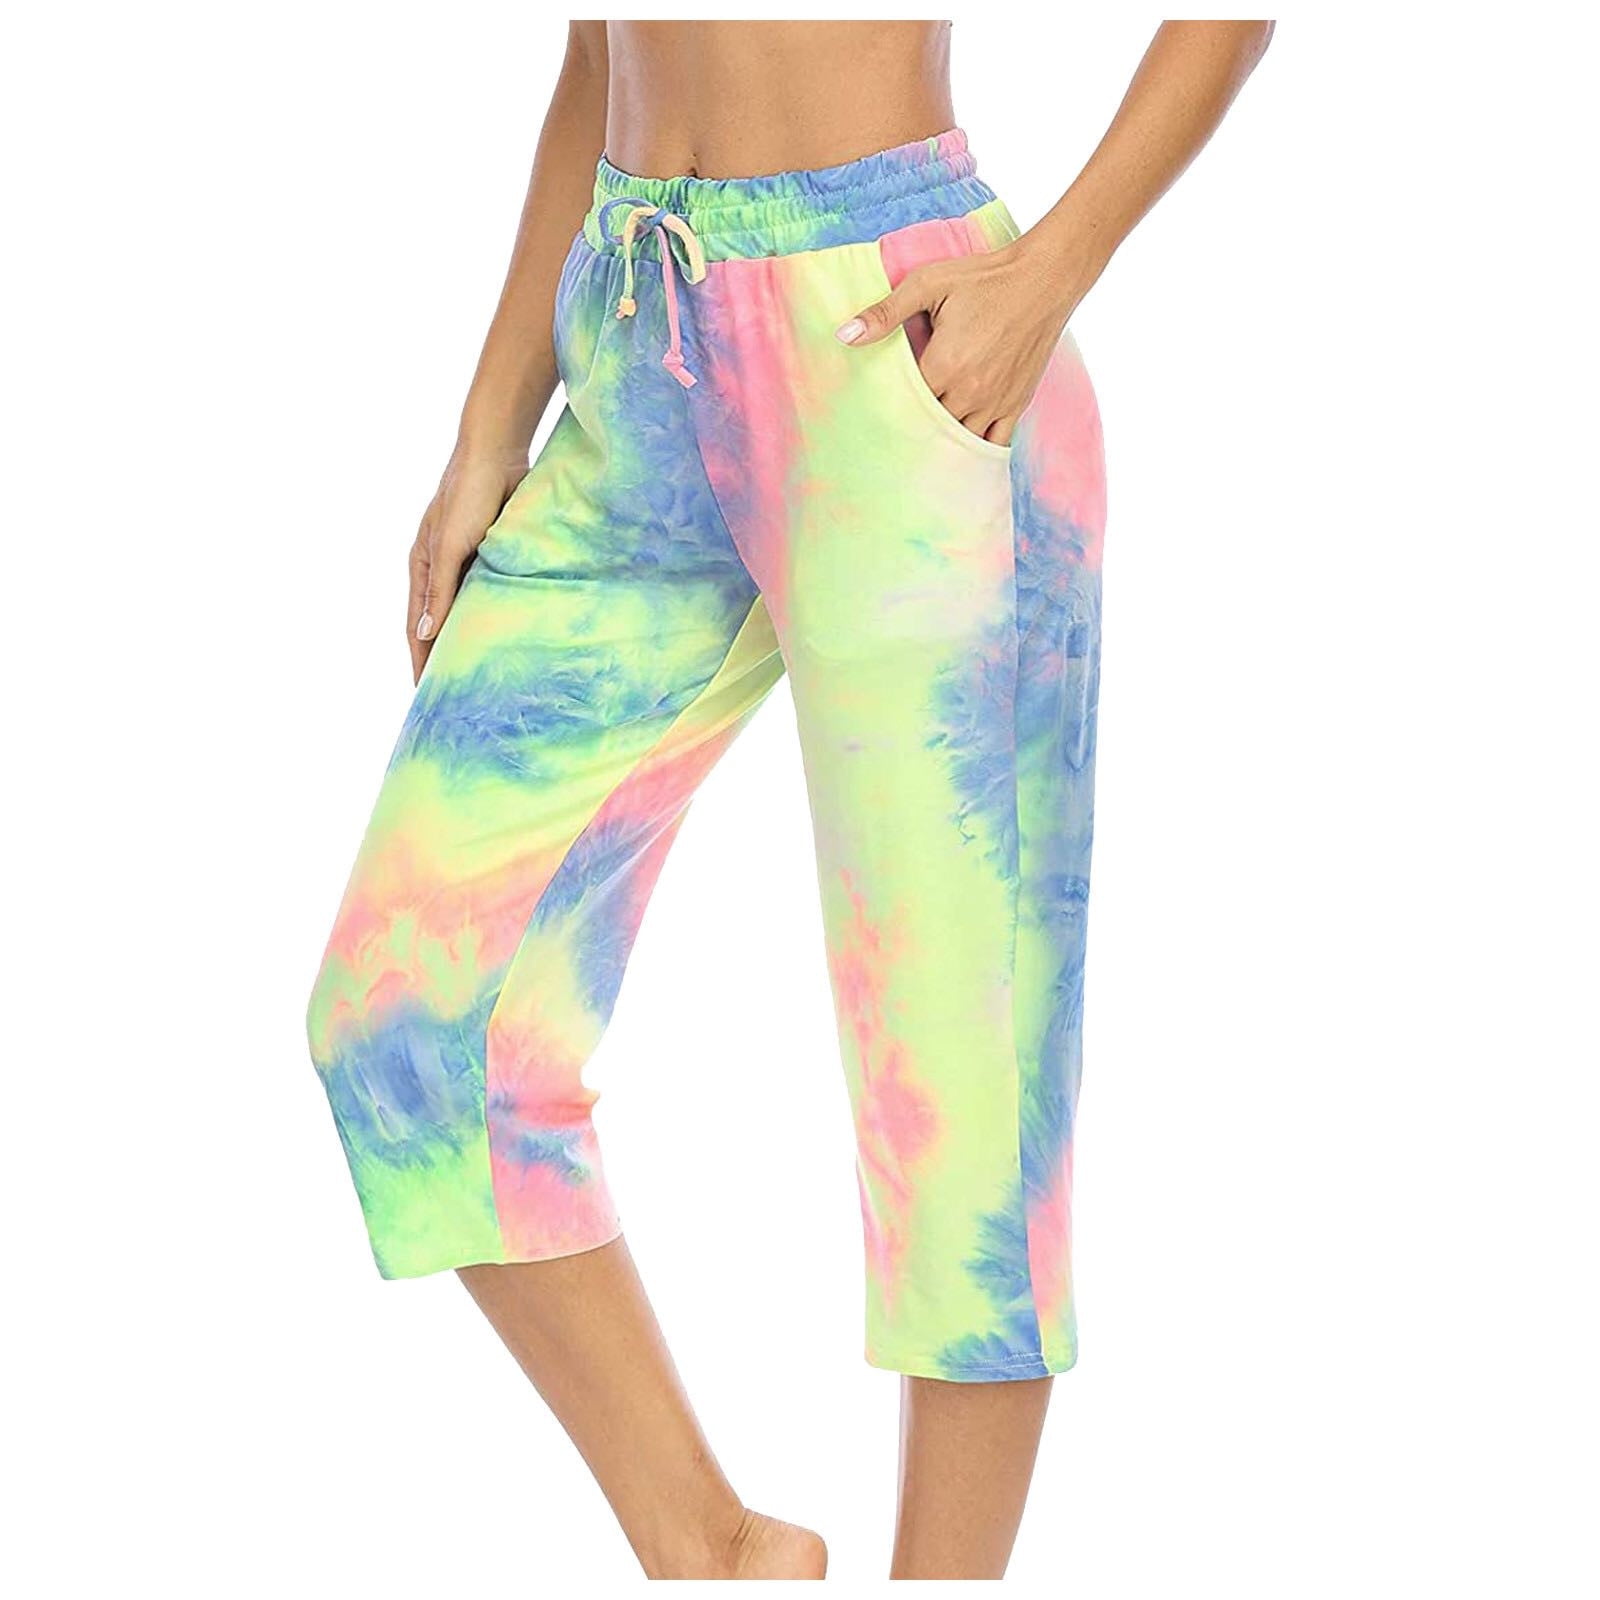 Amtdh Womens Tie Dye Yoga Capris Stretch Athletic Drawstring Workout Pants  Slimming Tummy Control Fitness Running Yoga Leggings for Women Green M